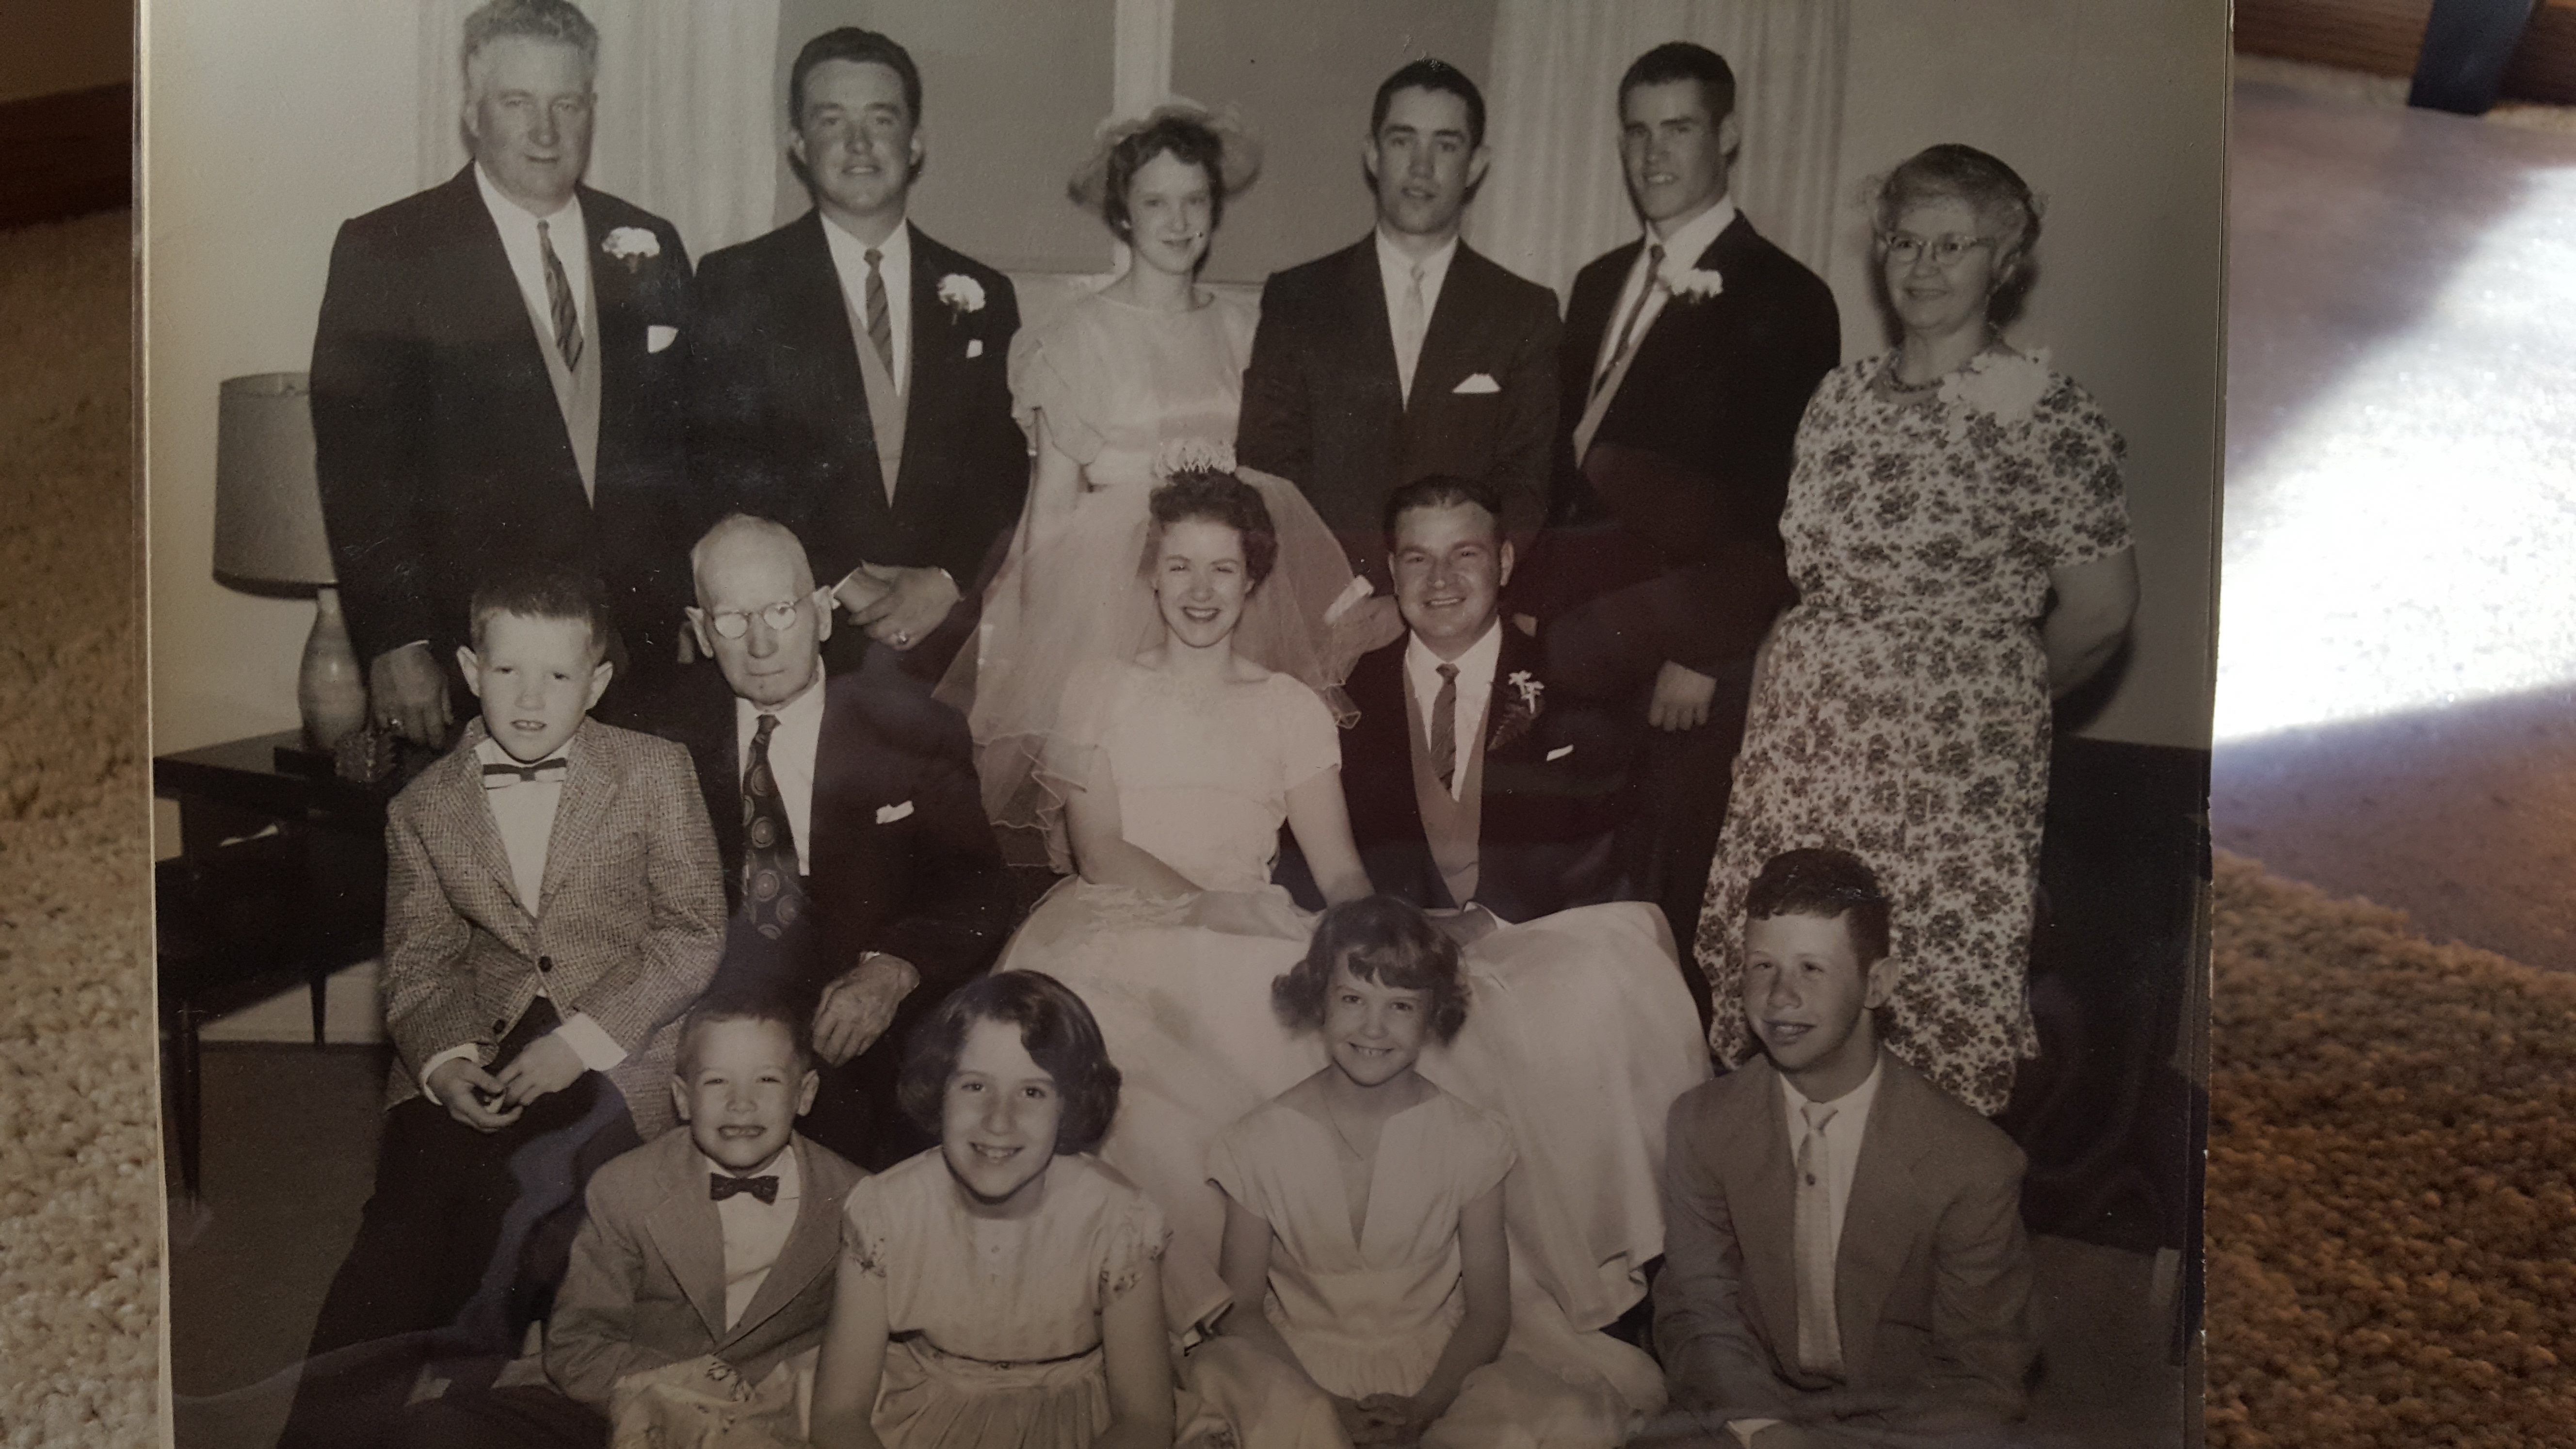 My parents wedding on May 27, 1961 in Richfield, MN.   Uncle Tony was almost 7 yrs old.  Enjoy the memories!